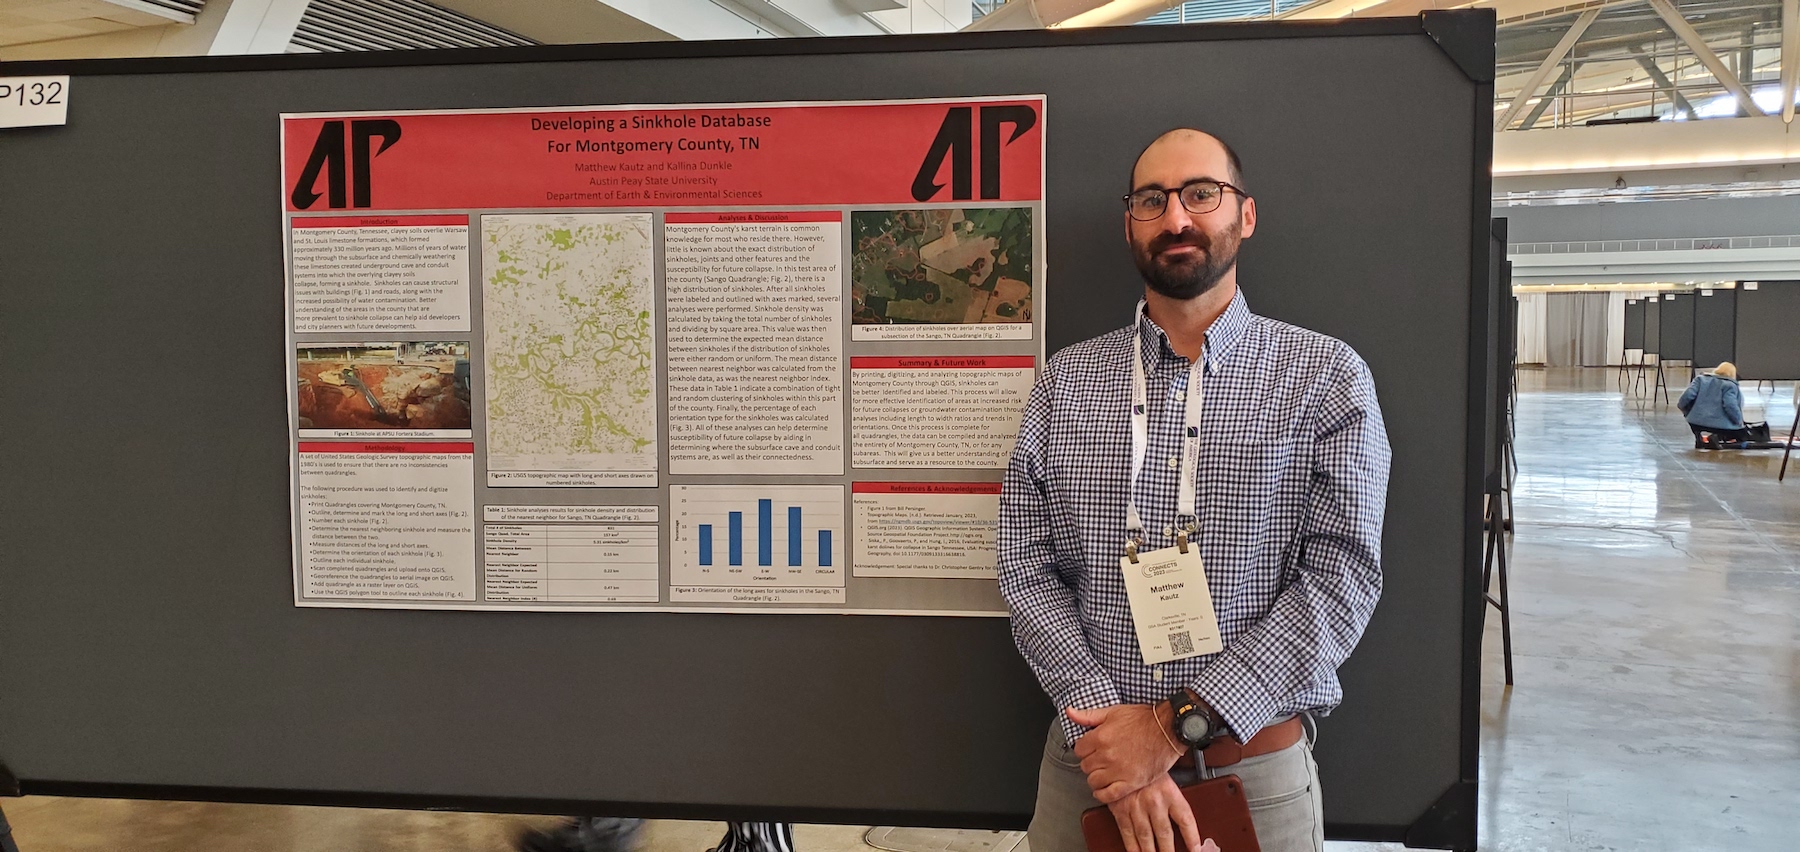 Matthew Kautz presents research on developing a sinkhole database in Montgomery County.